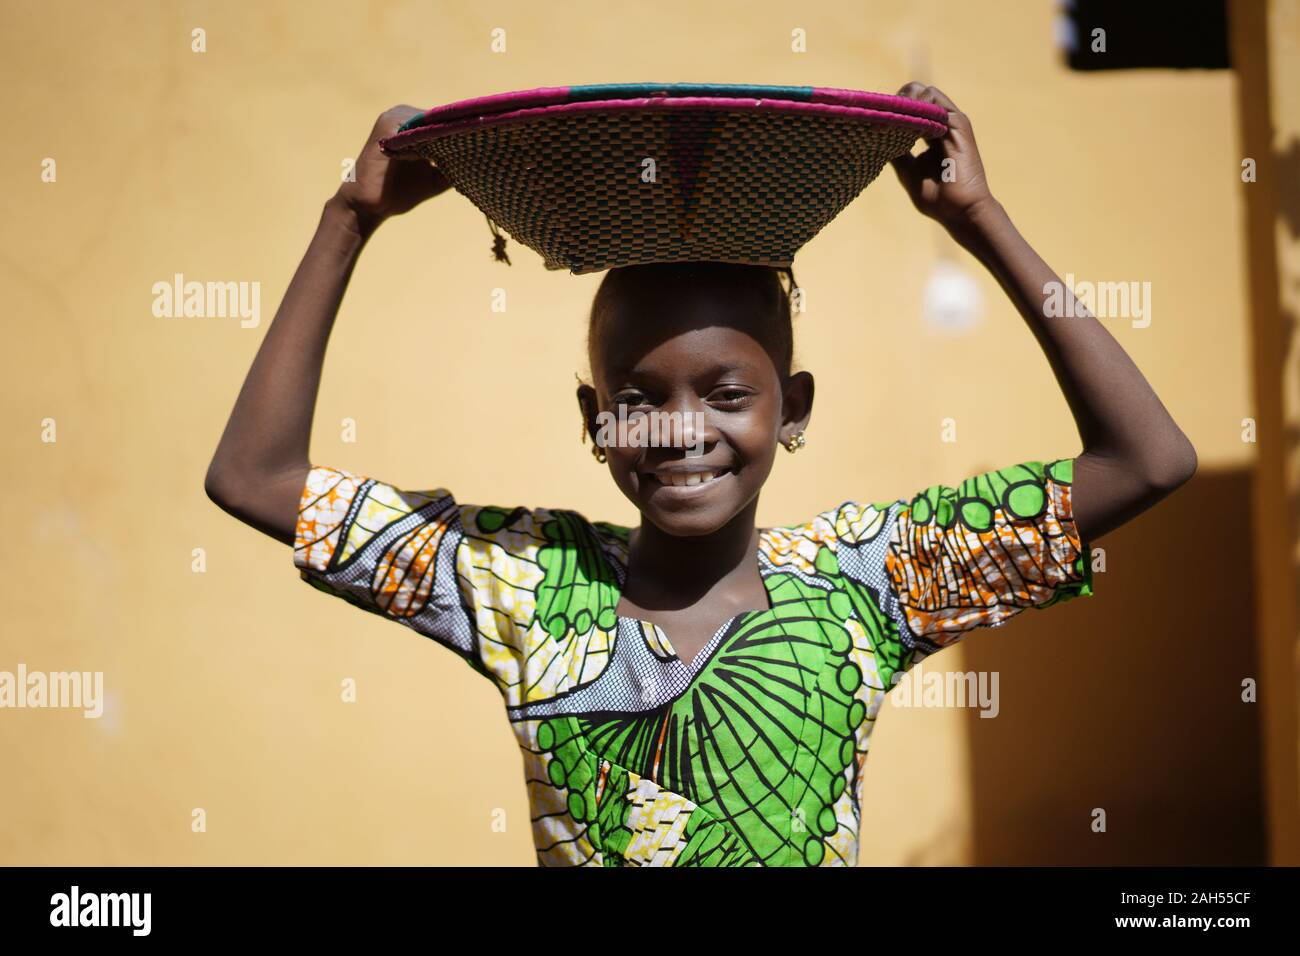 Cute African Girl Carrying a Couloured Handmade Straw Basket On Her Head Stock Photo